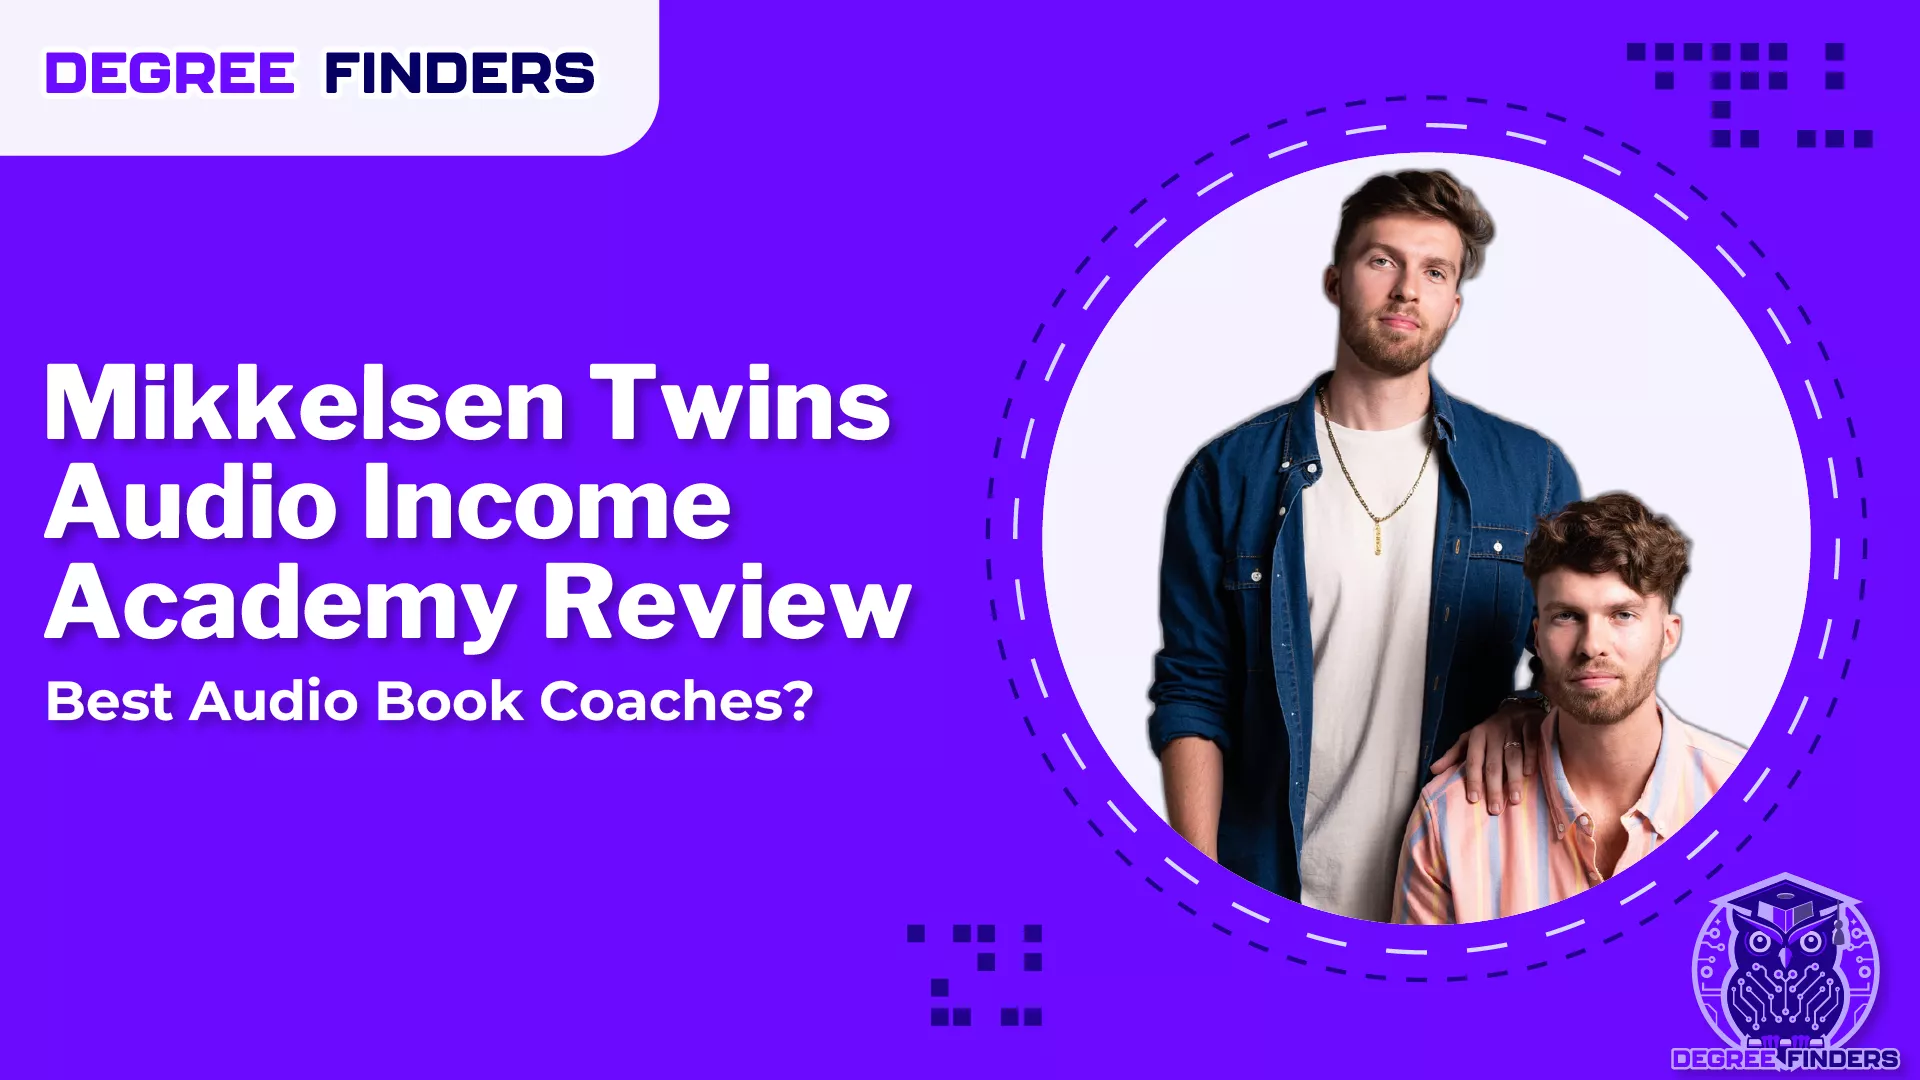 Mikkelsen Twins Audio Income Academy Review